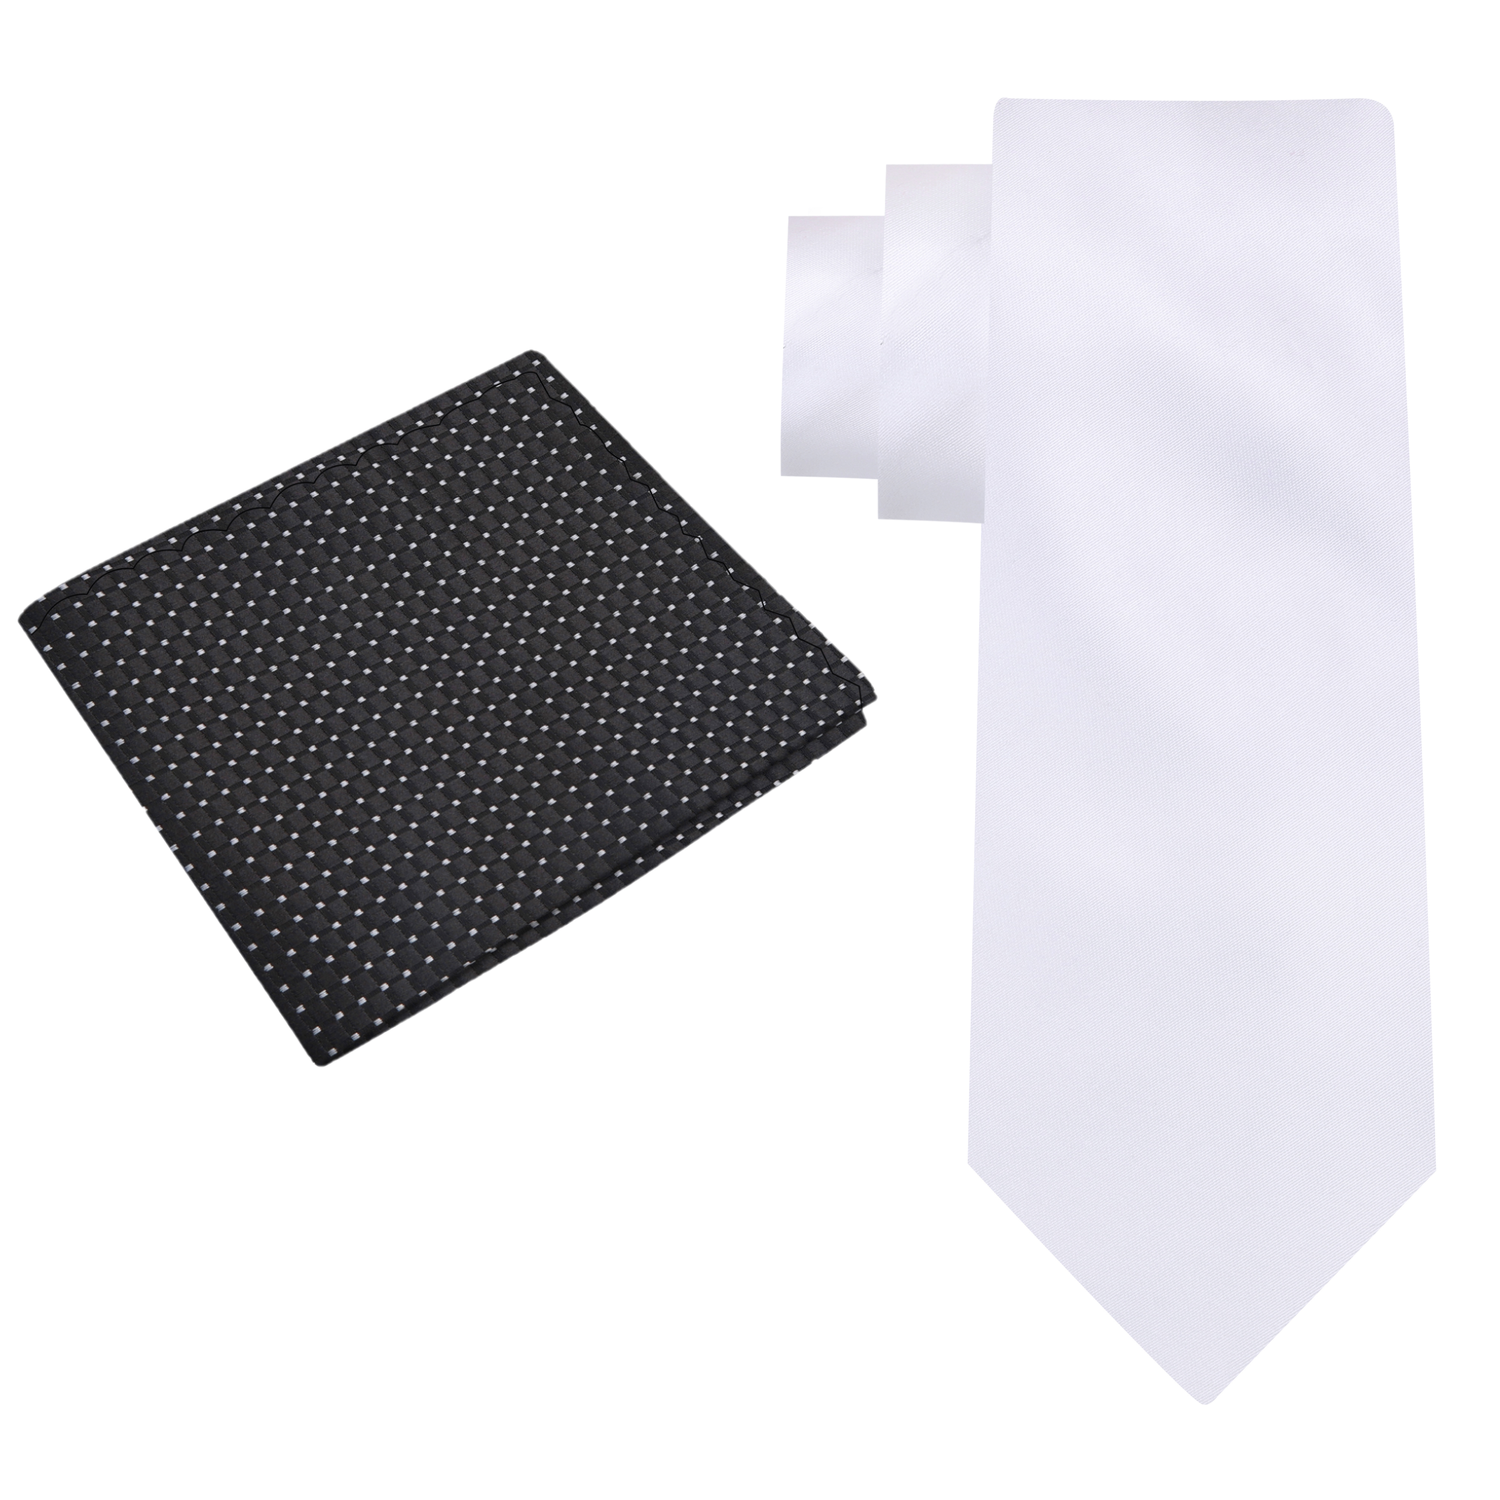 Alt View: Solid White Tie with Black Check Square